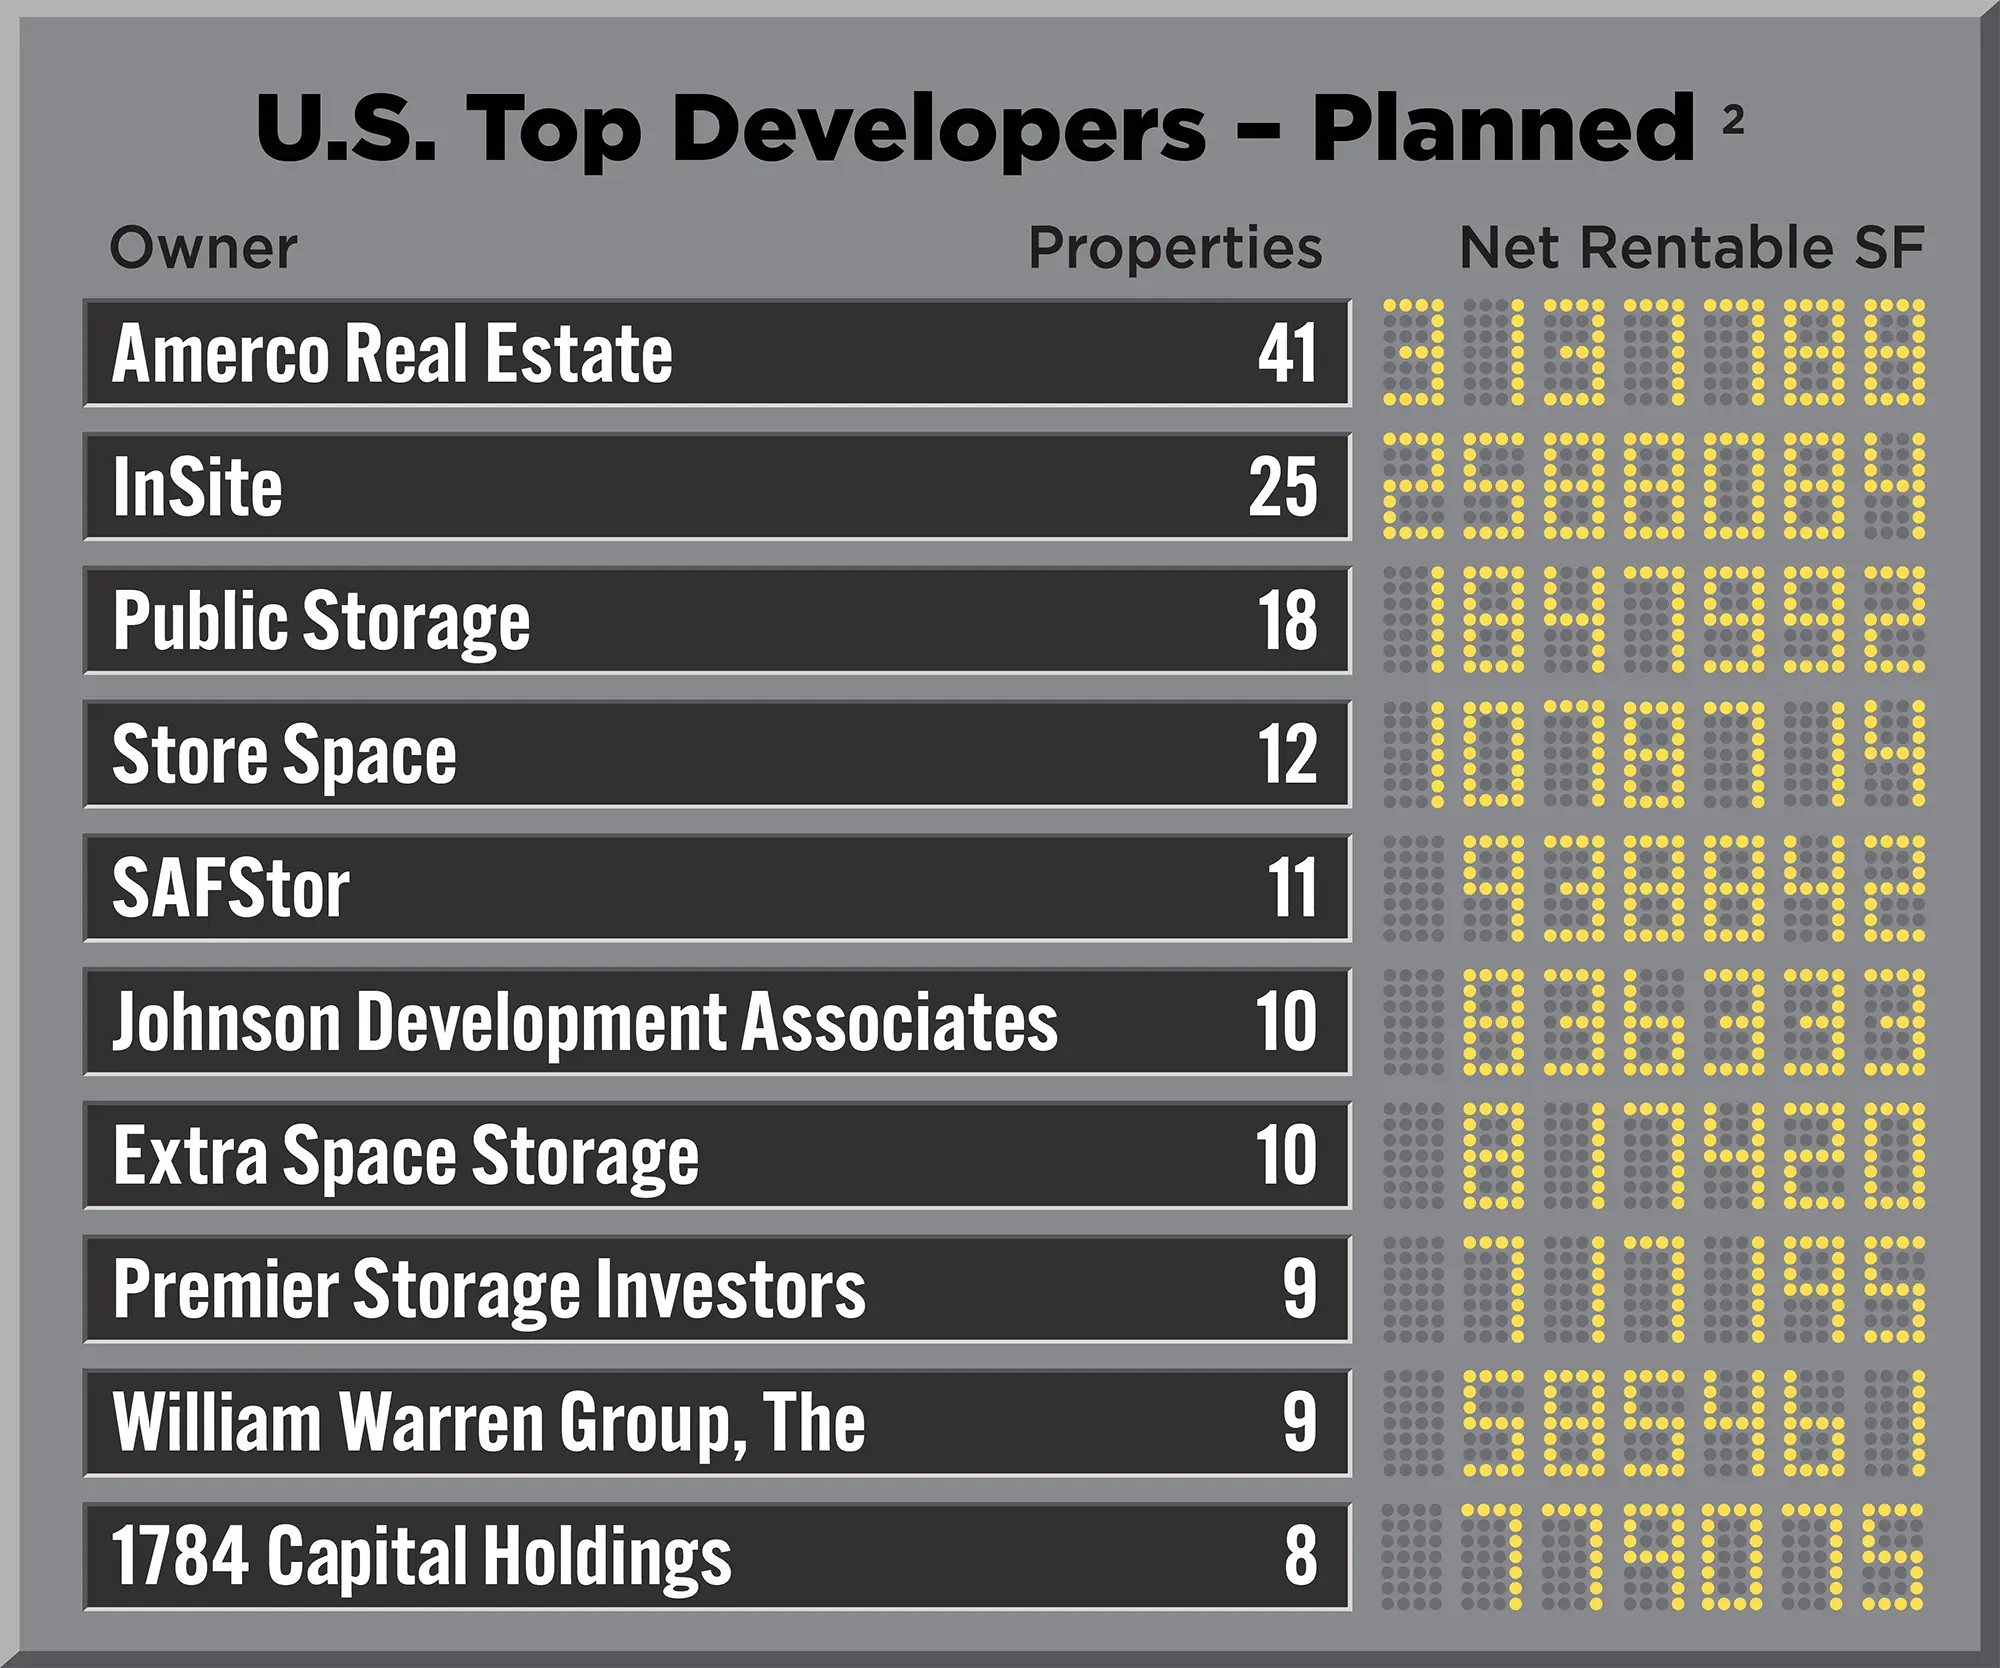 U.S. Top Developers - Planned